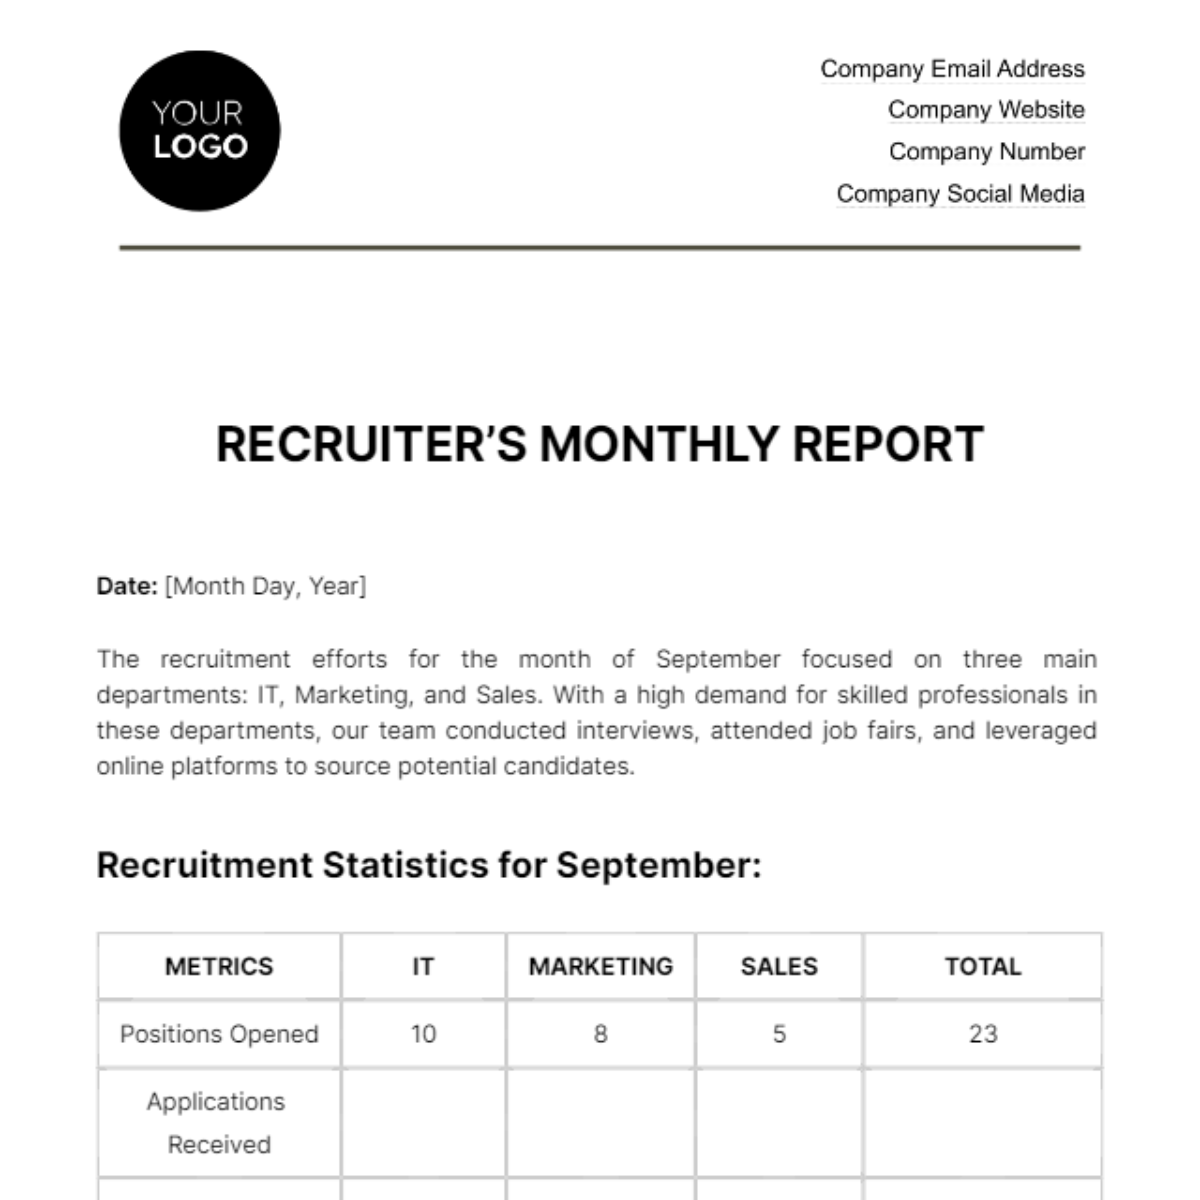 Free Recruiter's Monthly Report HR Template